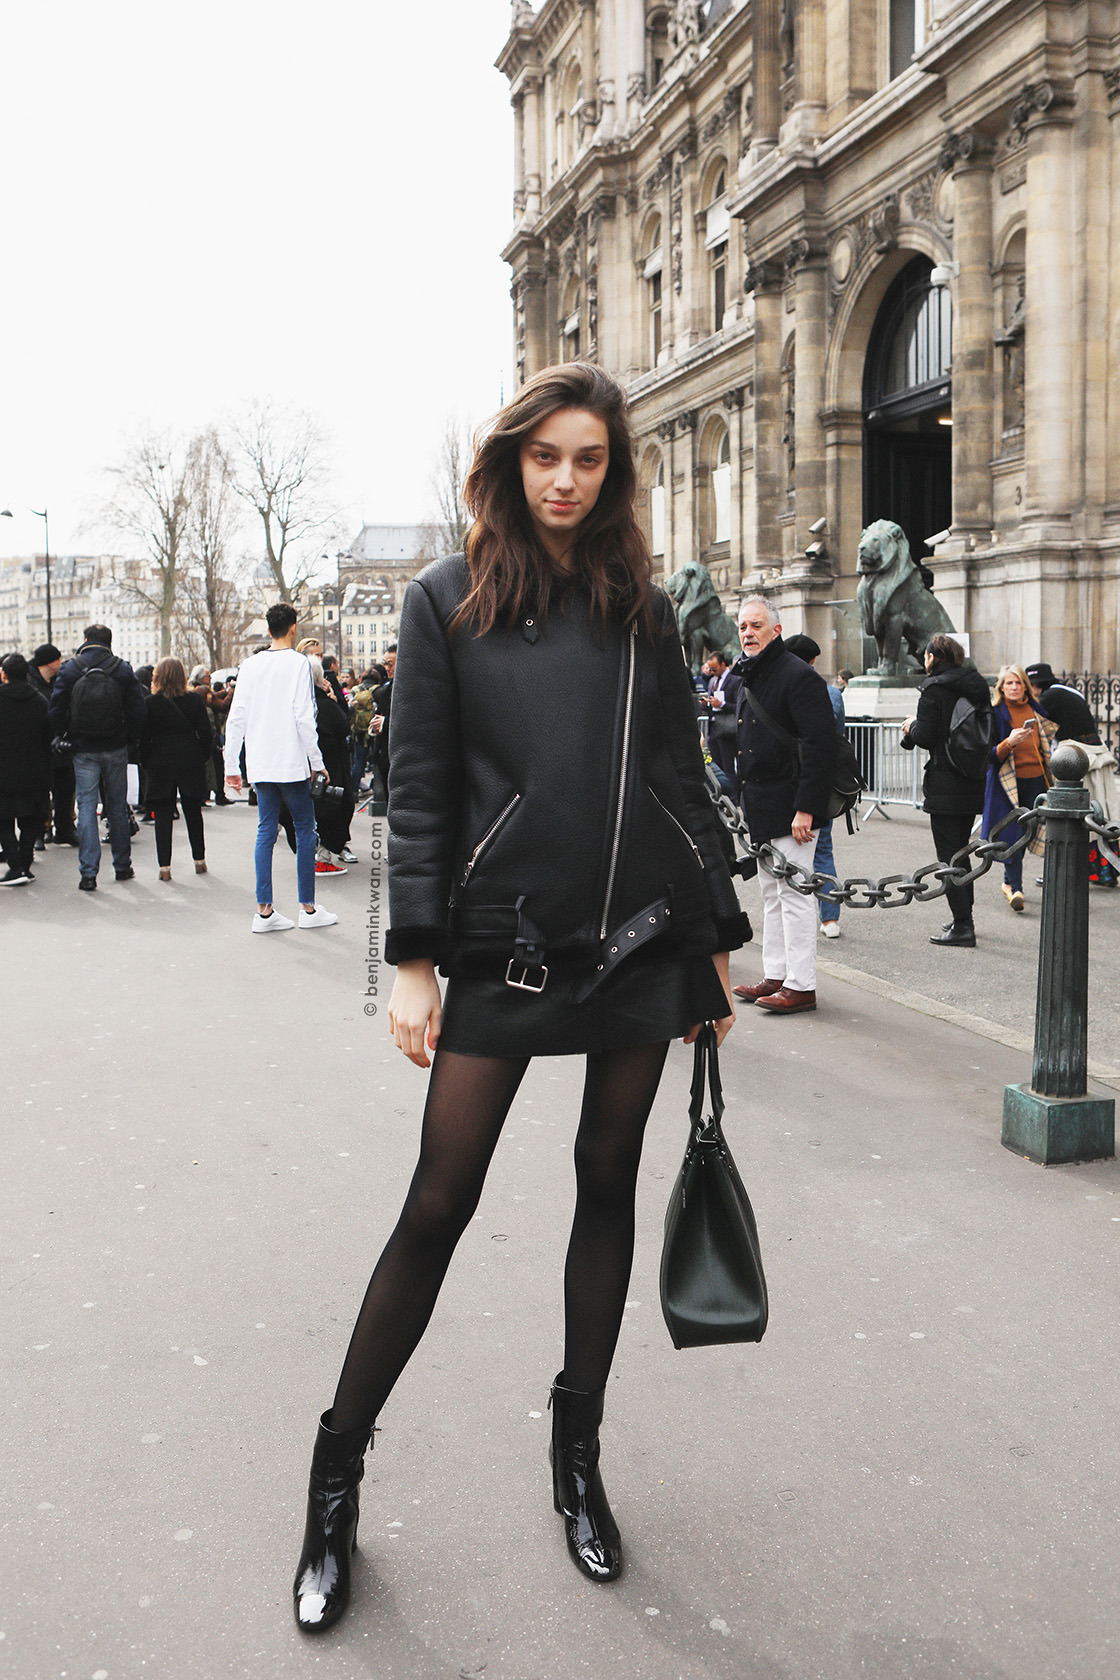 snappedbybenjaminkwan: Larissa Marchiori at Issey... - The Streets of Style